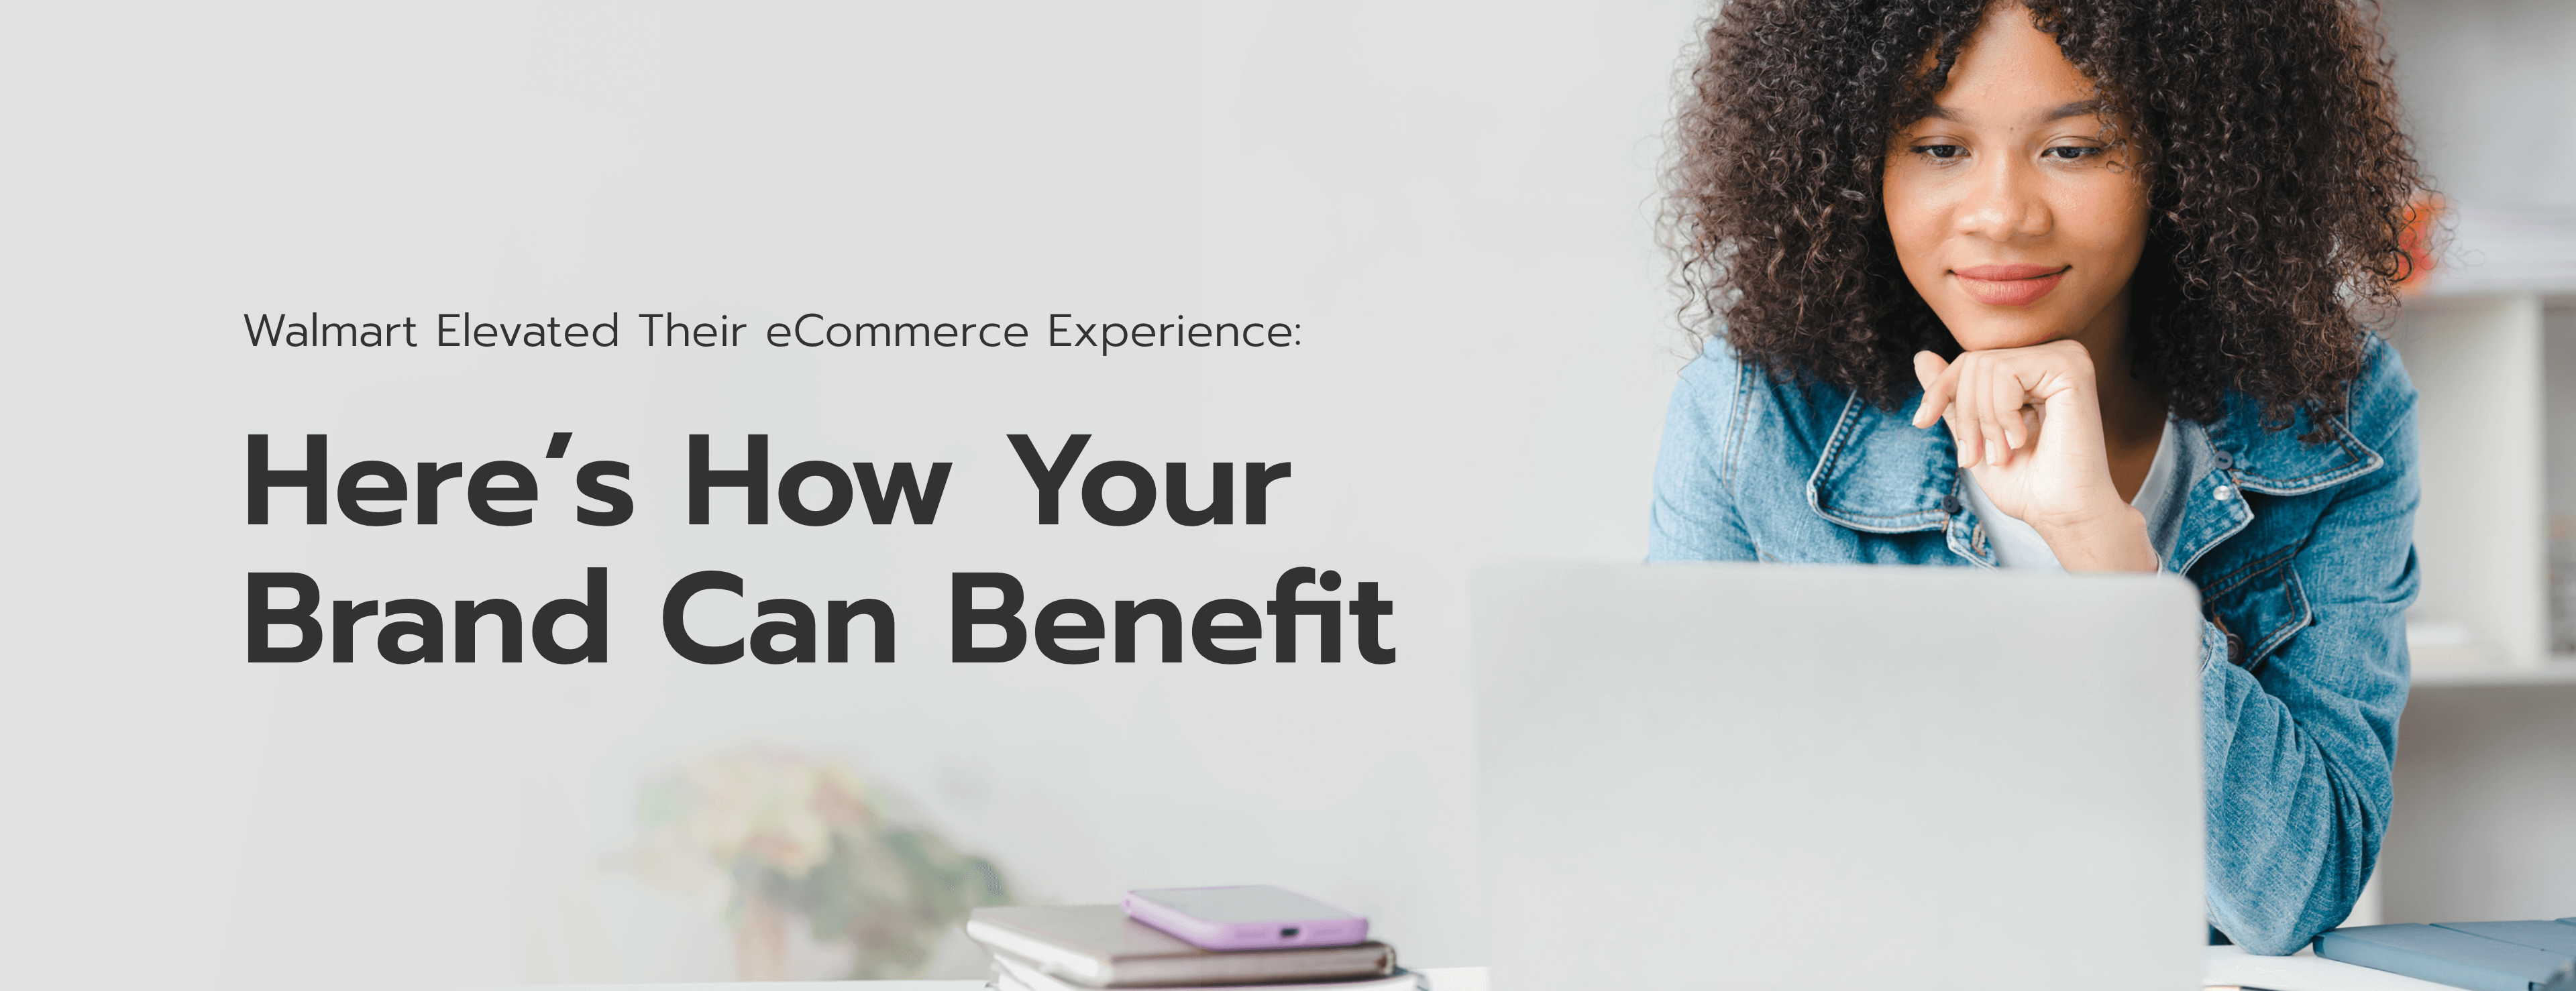 Walmart Elevated Their eCommerce Experience: Here’s How Your Brand can Benefit